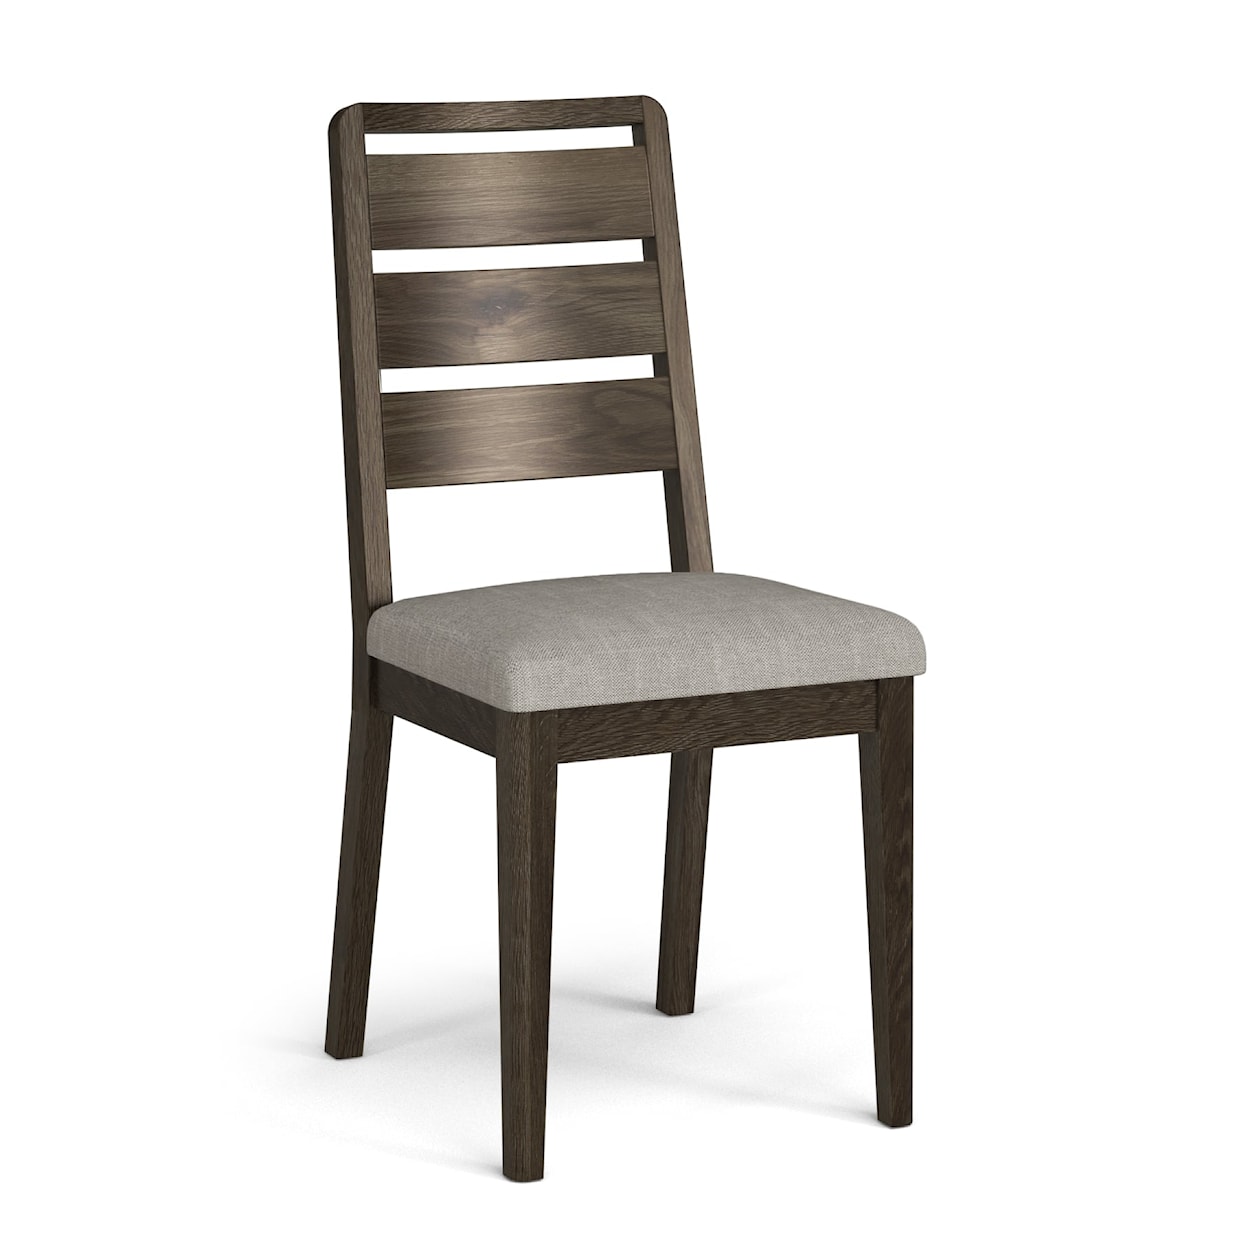 Global Home Amherst Ladder Back Dining Chair